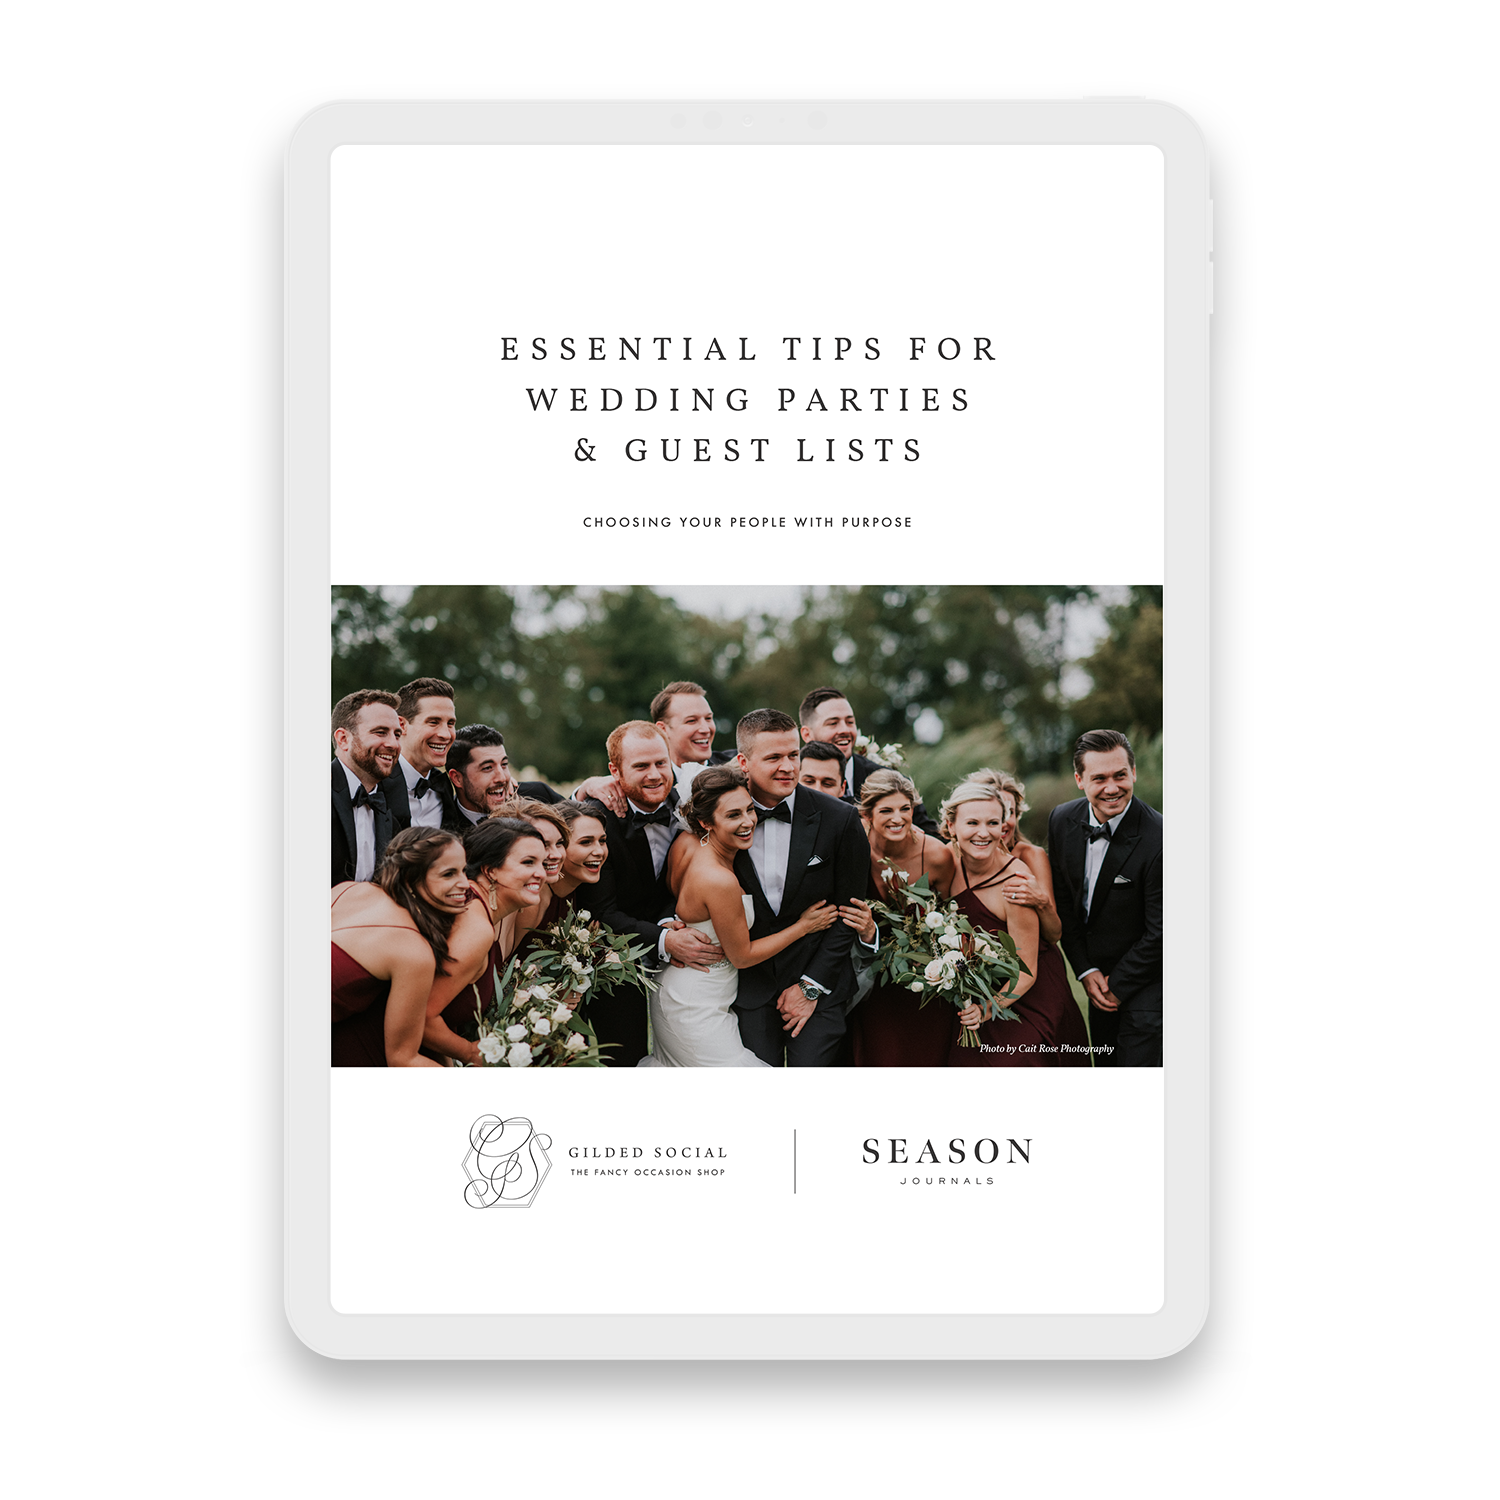 Essential Tips for Wedding Parties & Guest Lists